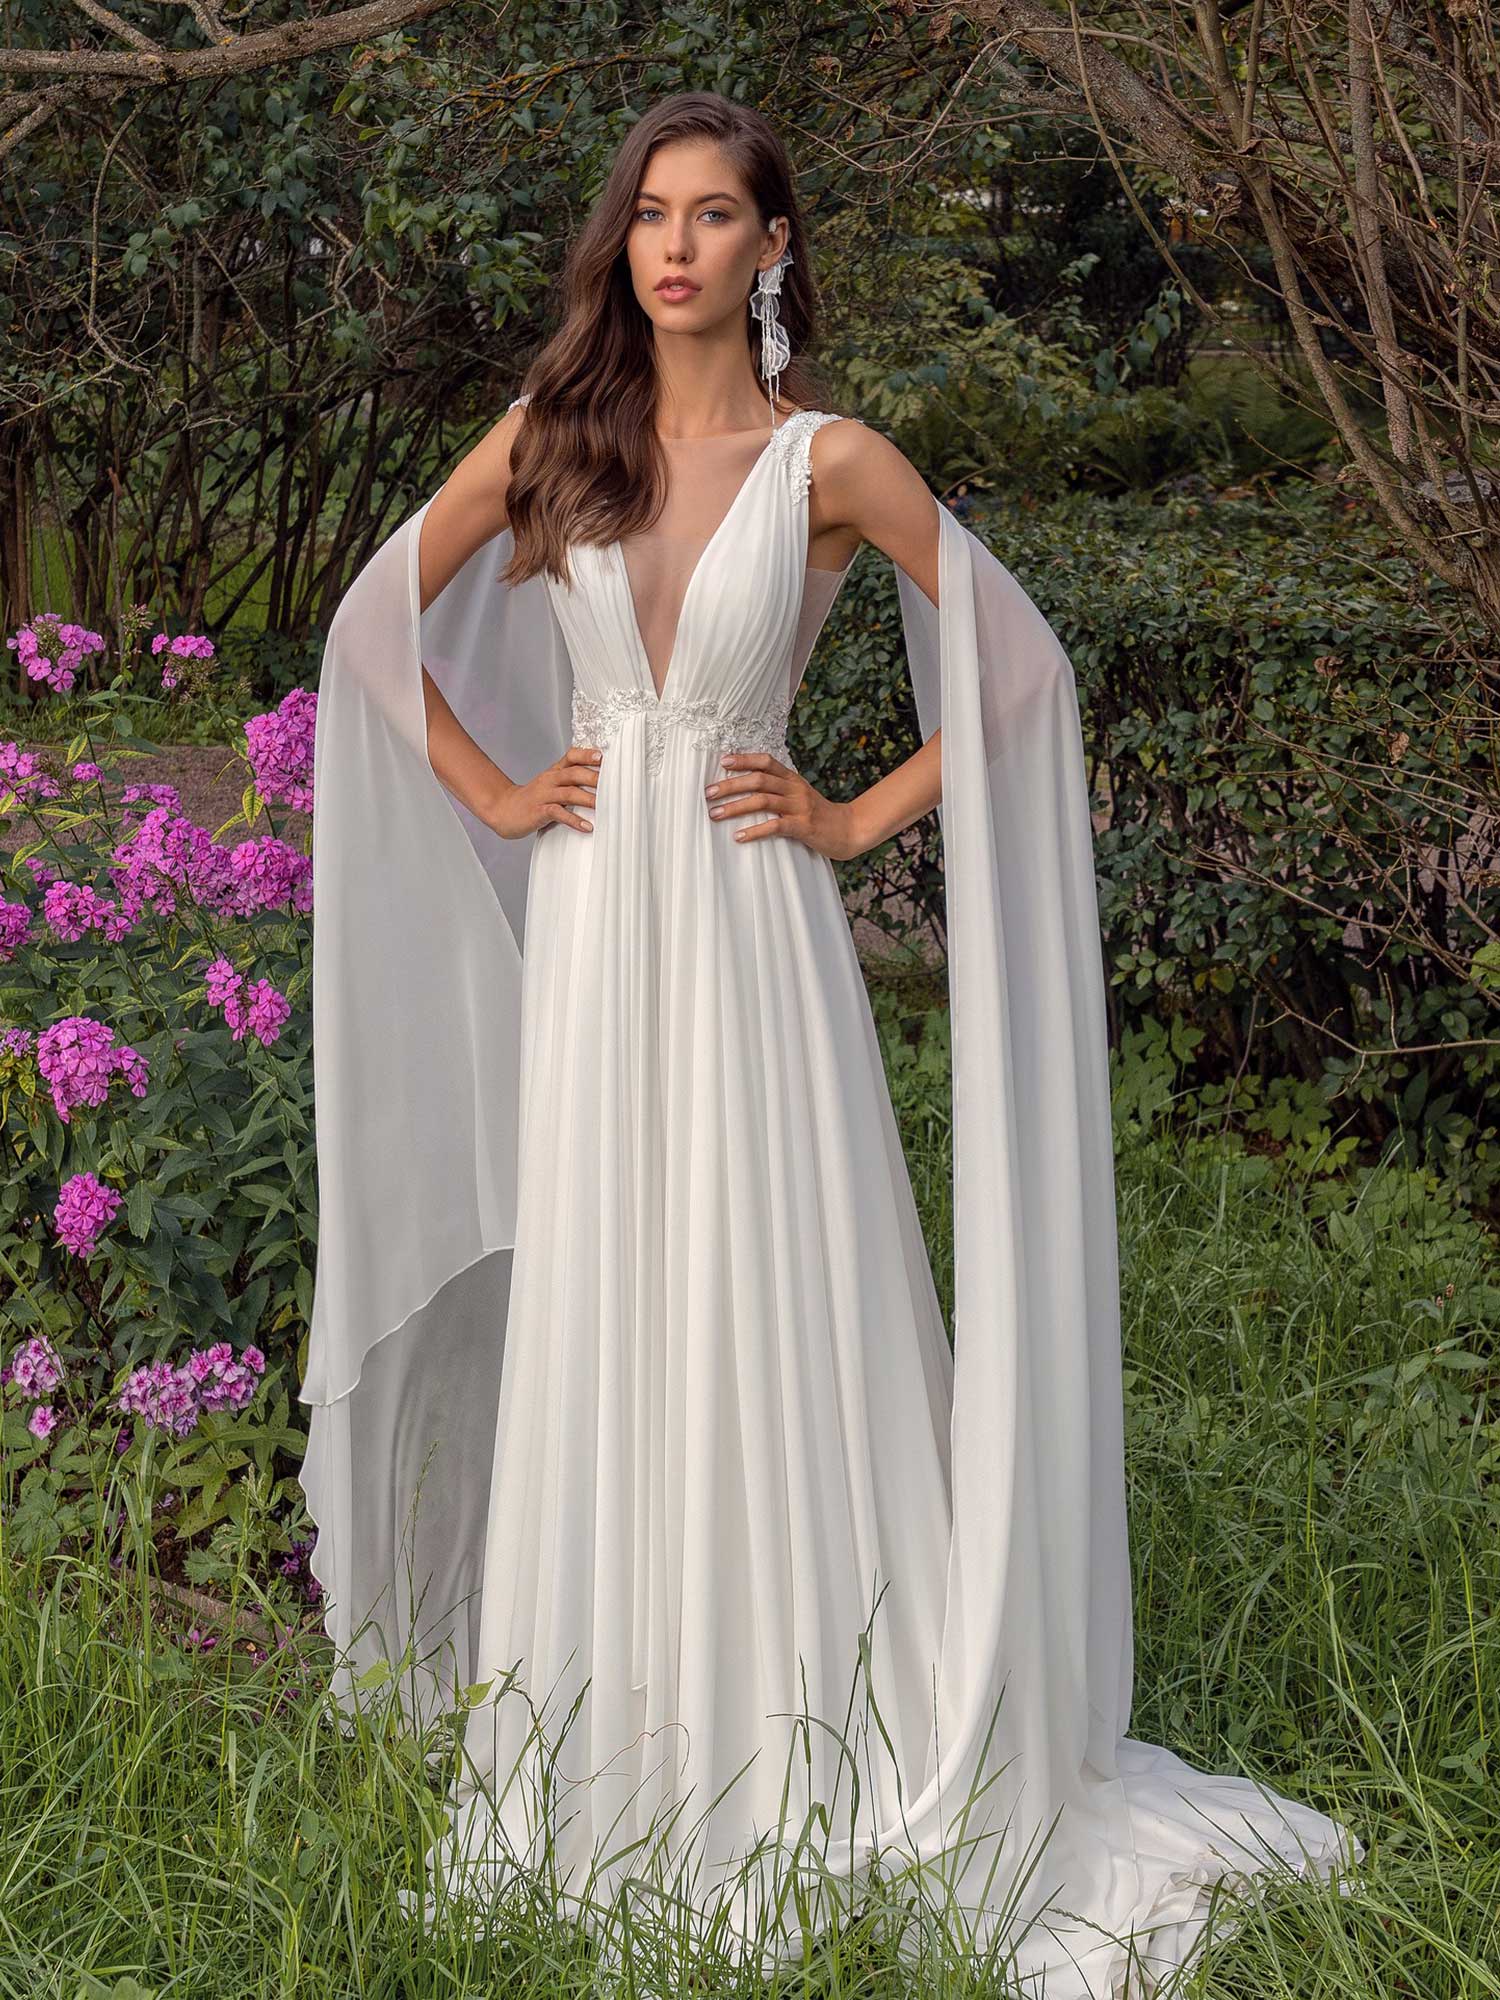 Plunging Neckline Chiffon Wedding Dress With Detachable Cape Sleeves And Open Back 4289